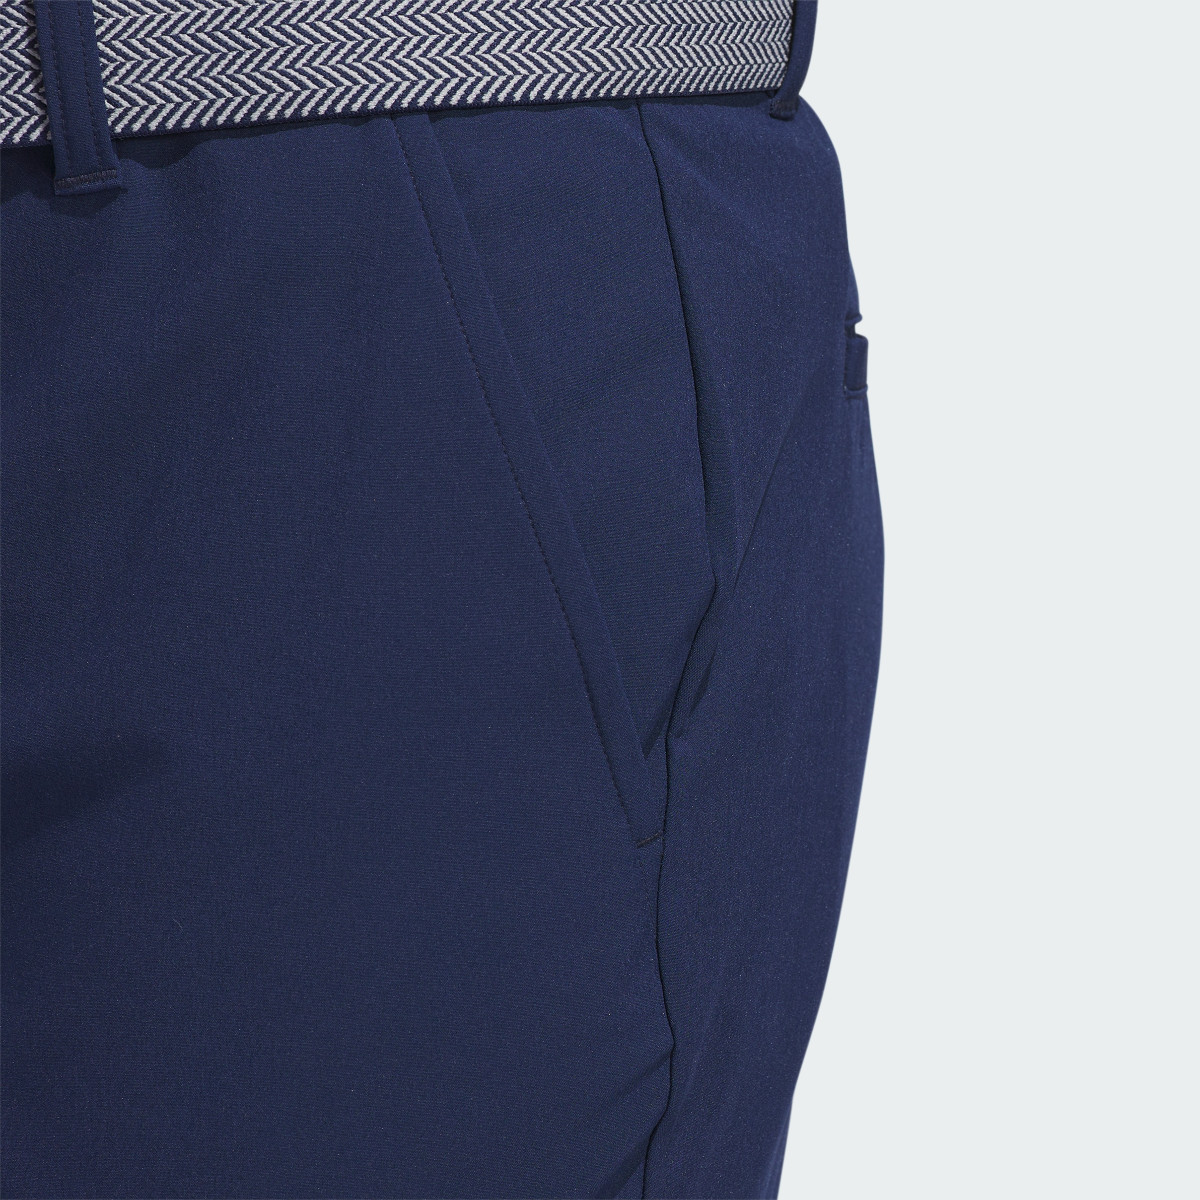 Adidas Ultimate365 Tapered Golf Trousers. 6